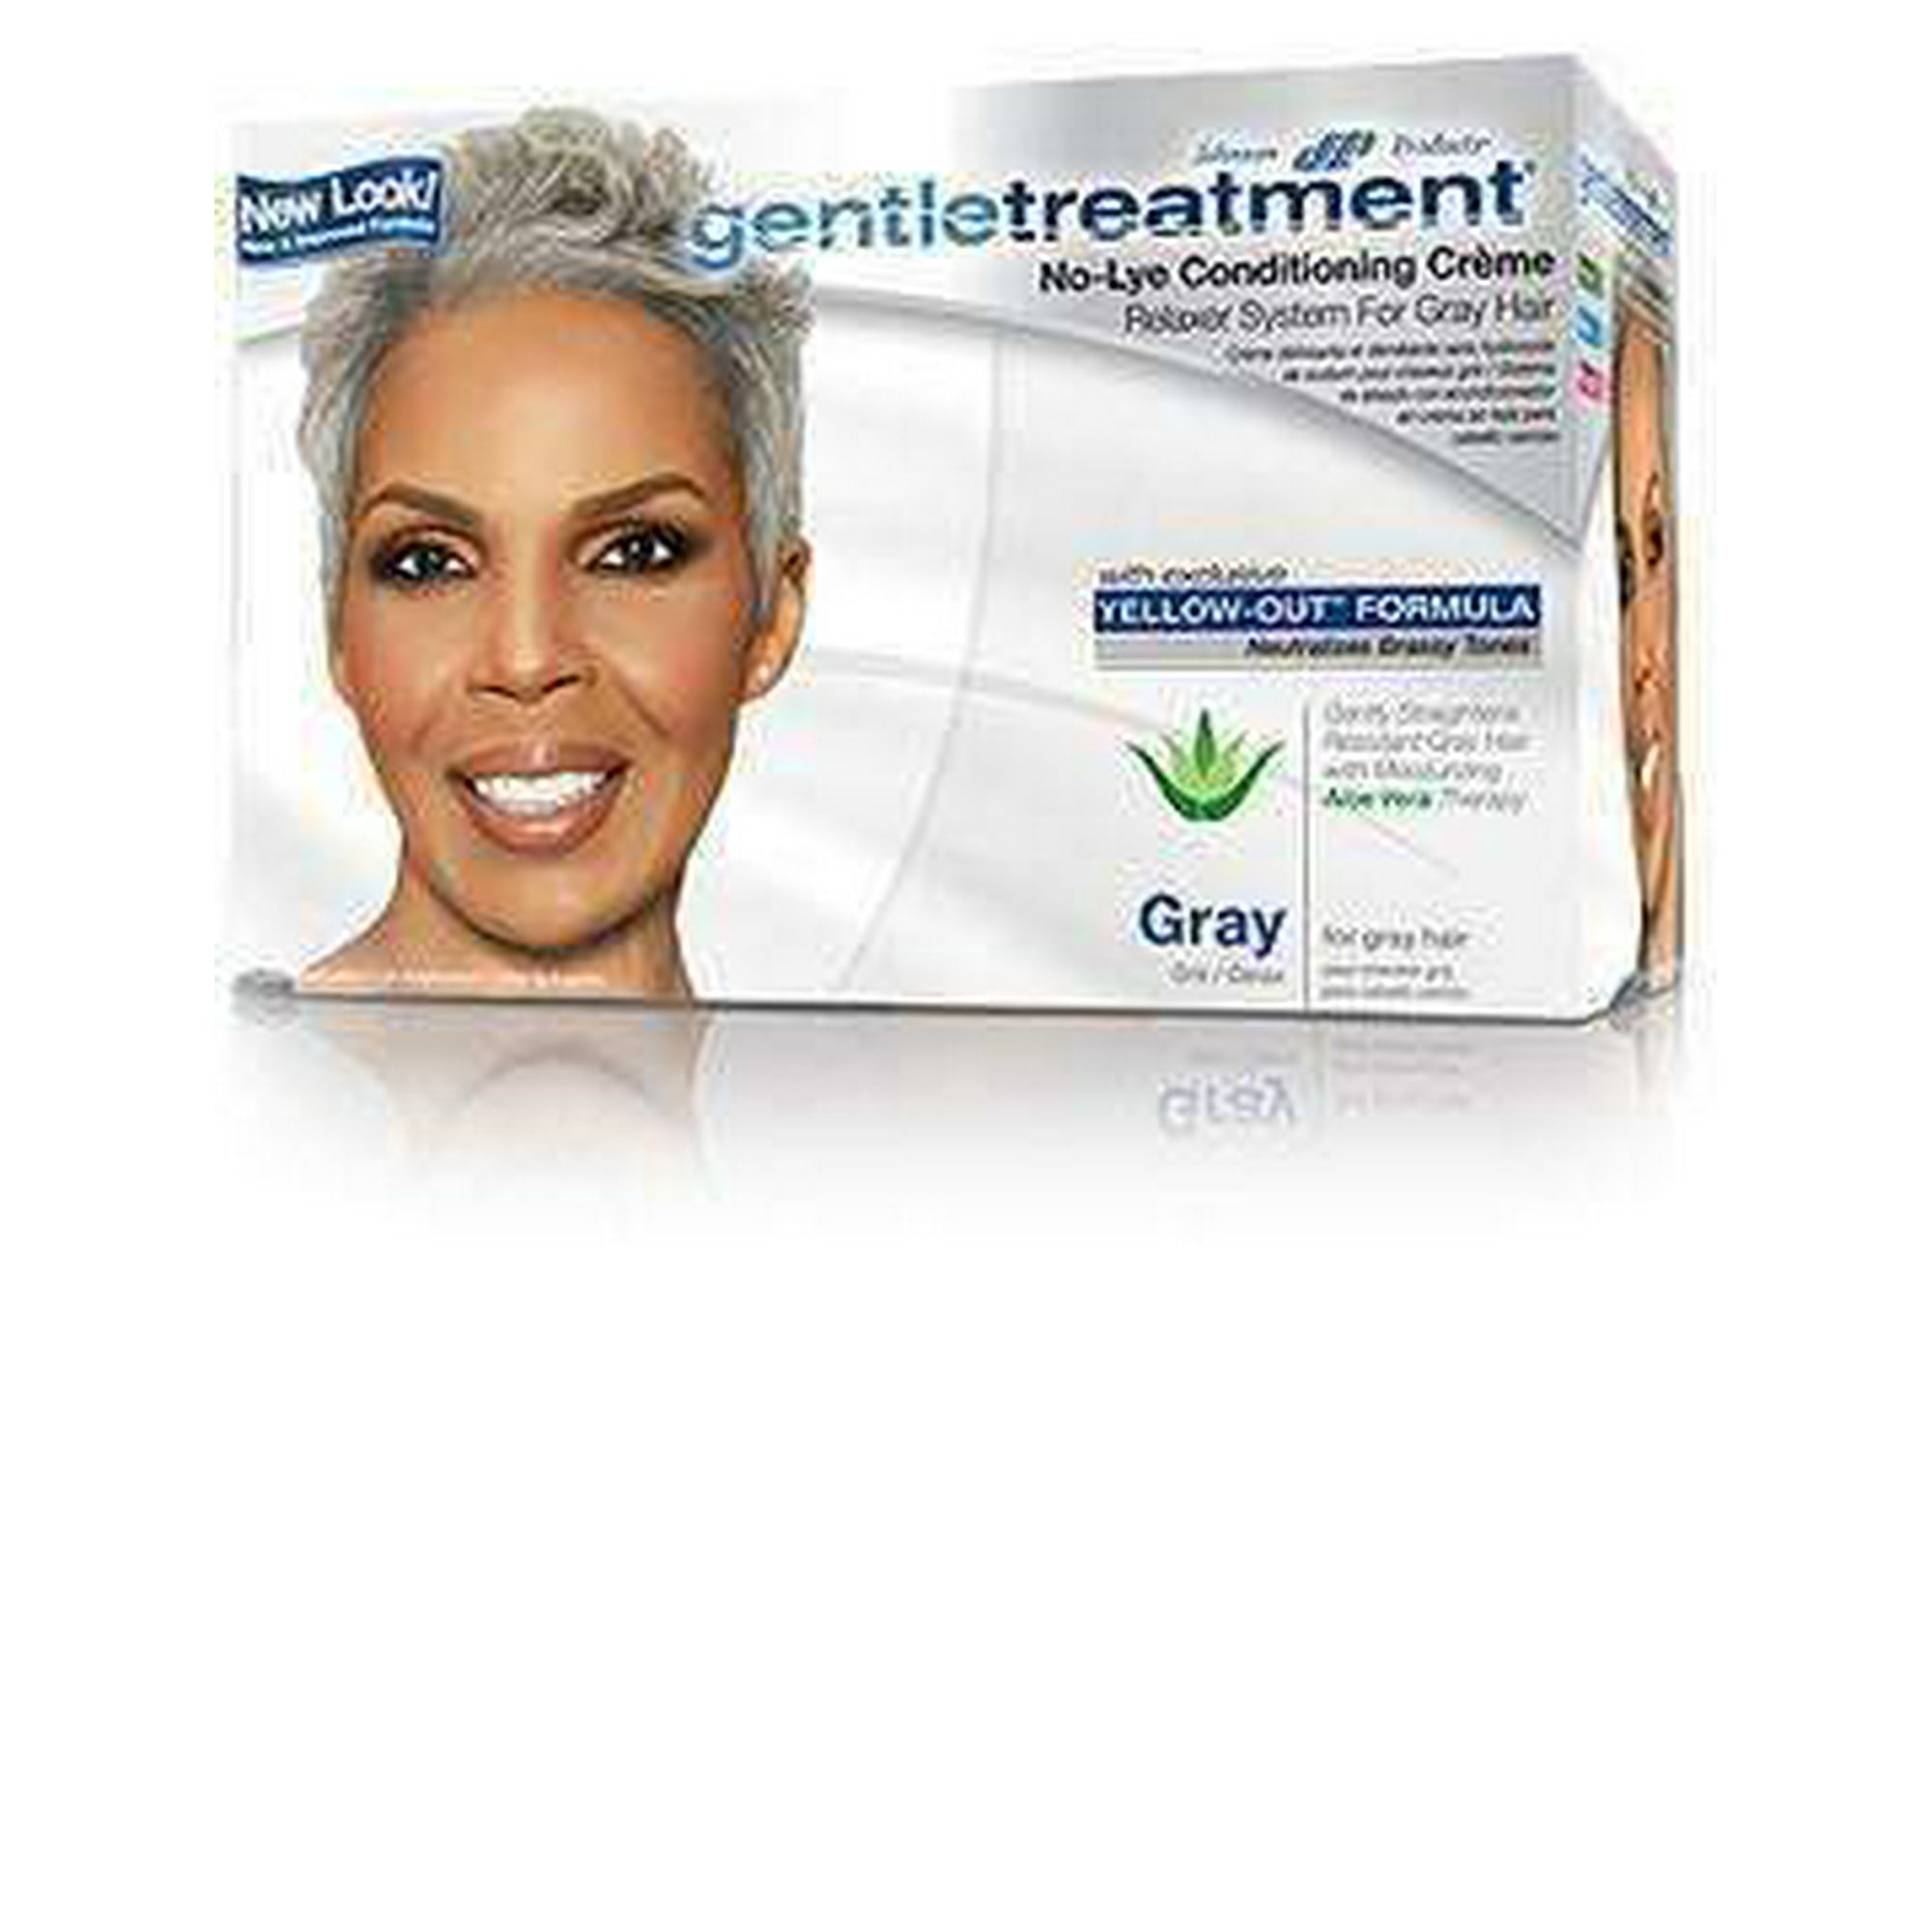 Gentle Treatment No Lye Conditioning Creme Relaxer System For Gray Hair |  Walmart Canada